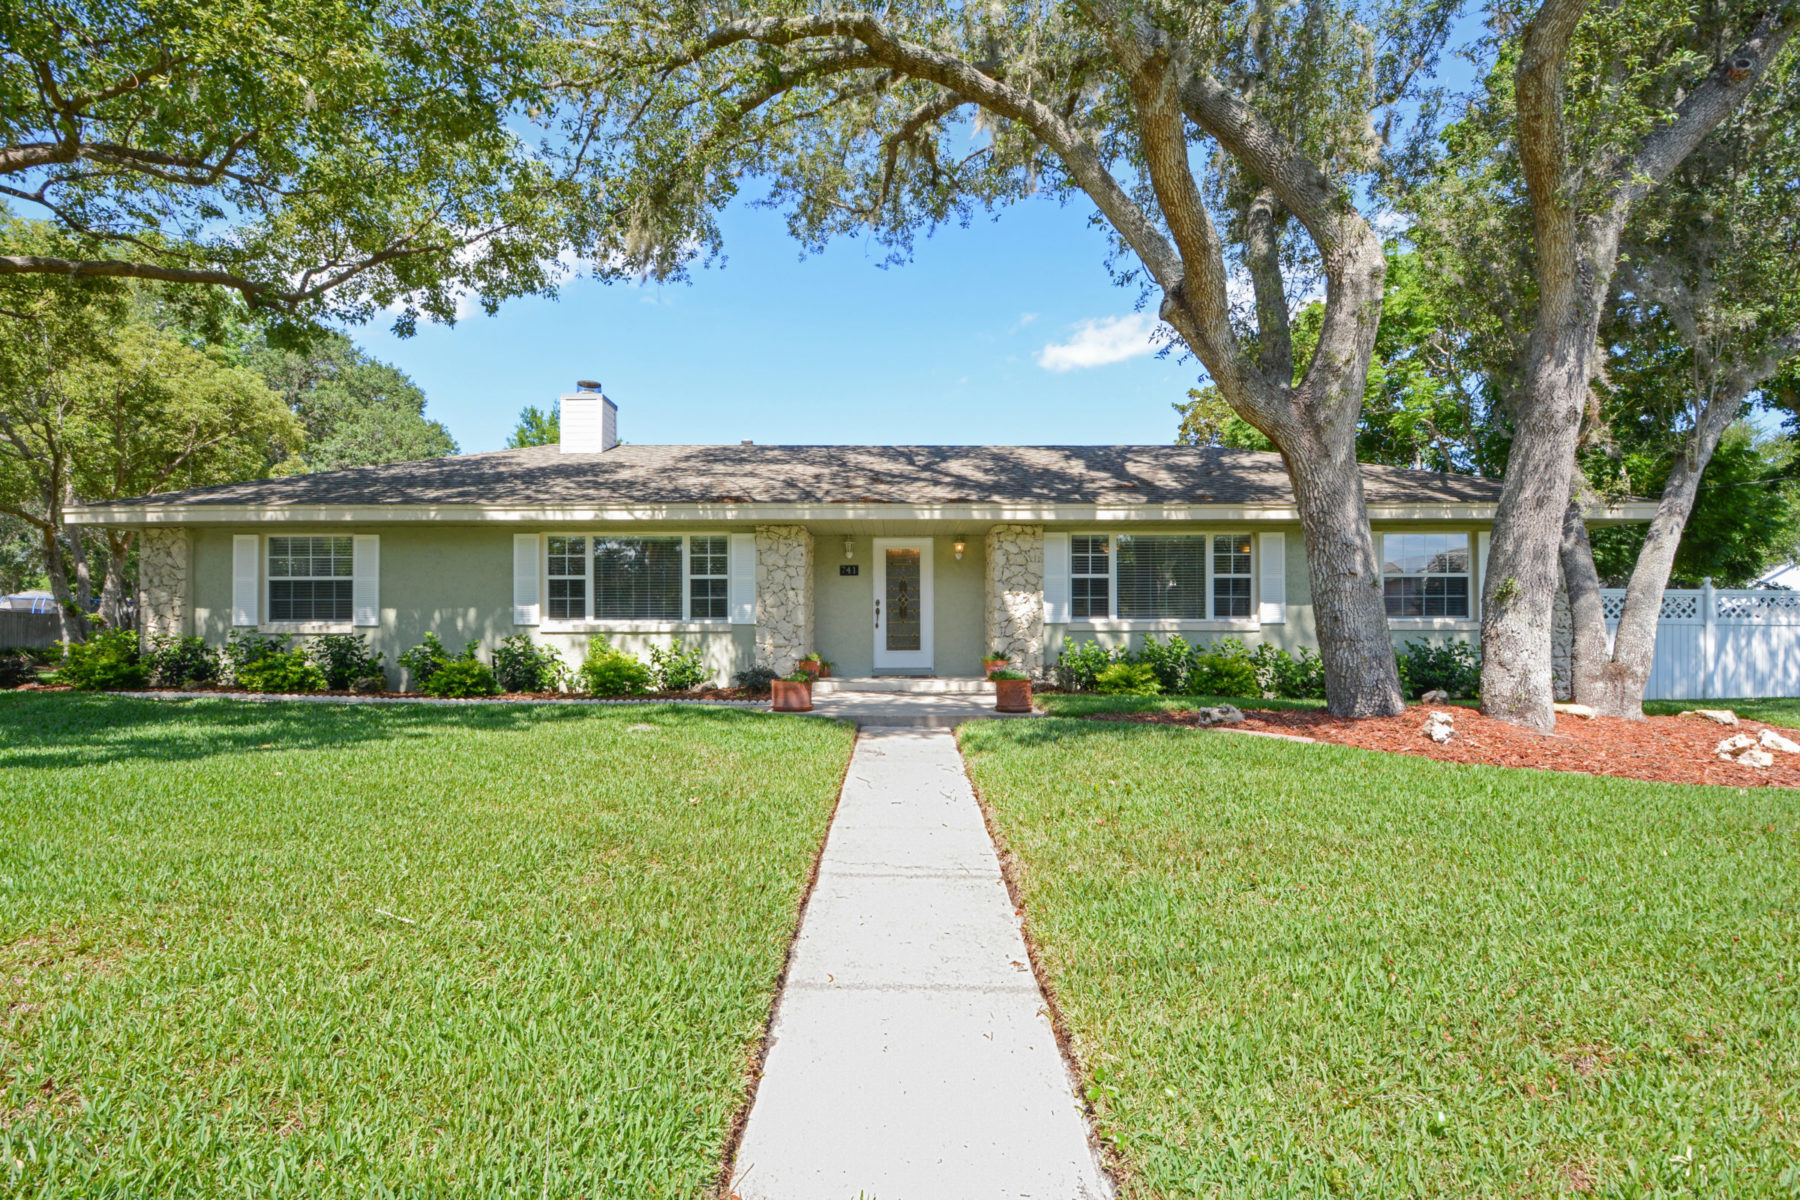 Front view of 741 N Lake Jessup Ave, Oviedo, FL 32765